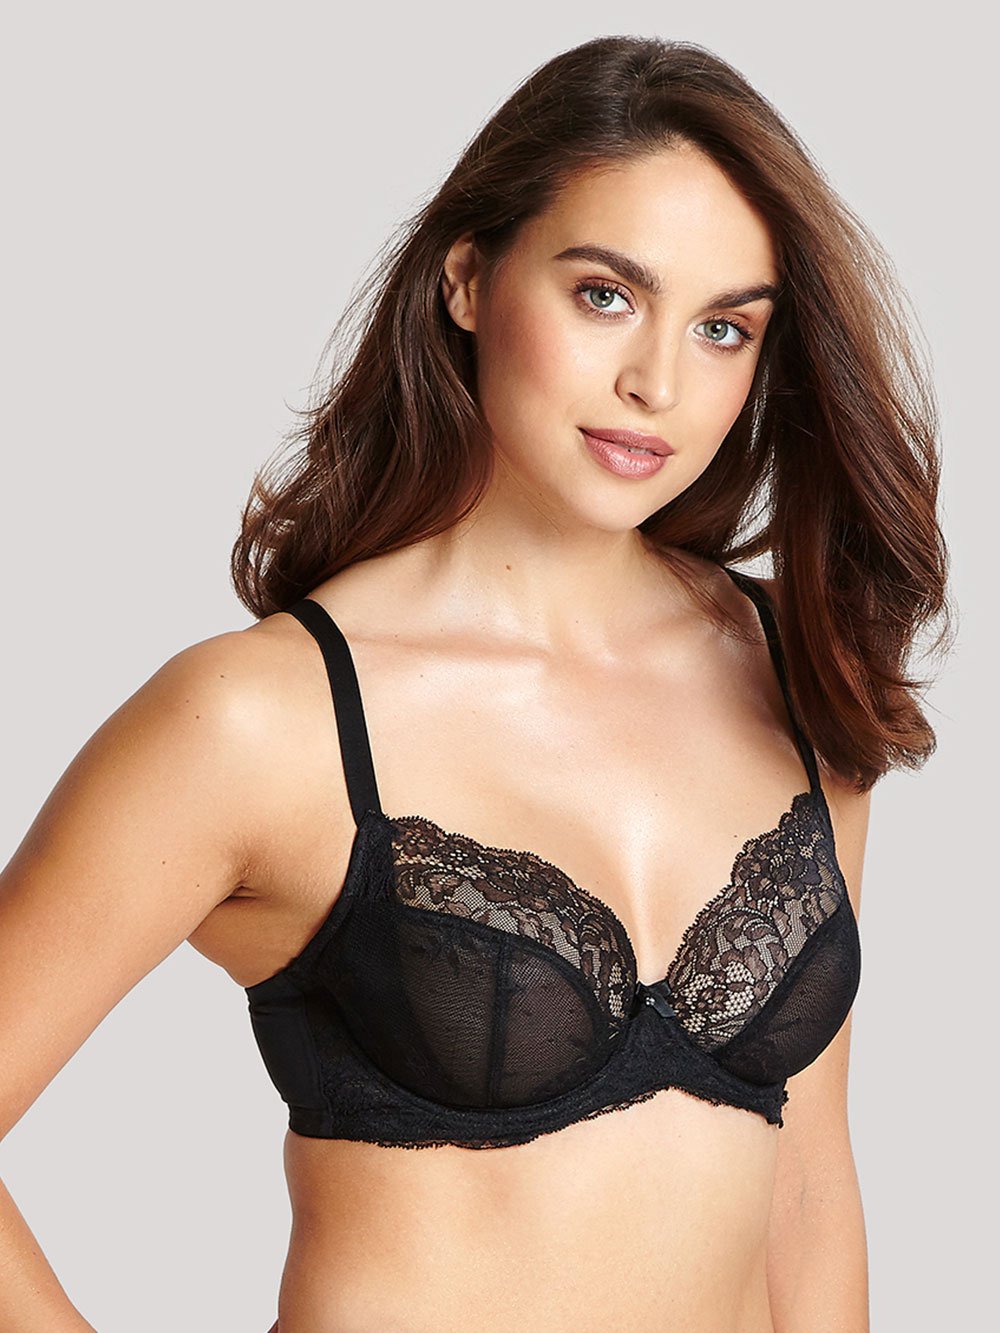 Lace Bra Set With Thin And Transparent Non-sponge Bra For Women, Making Big  Bust Look Smaller And Sexy